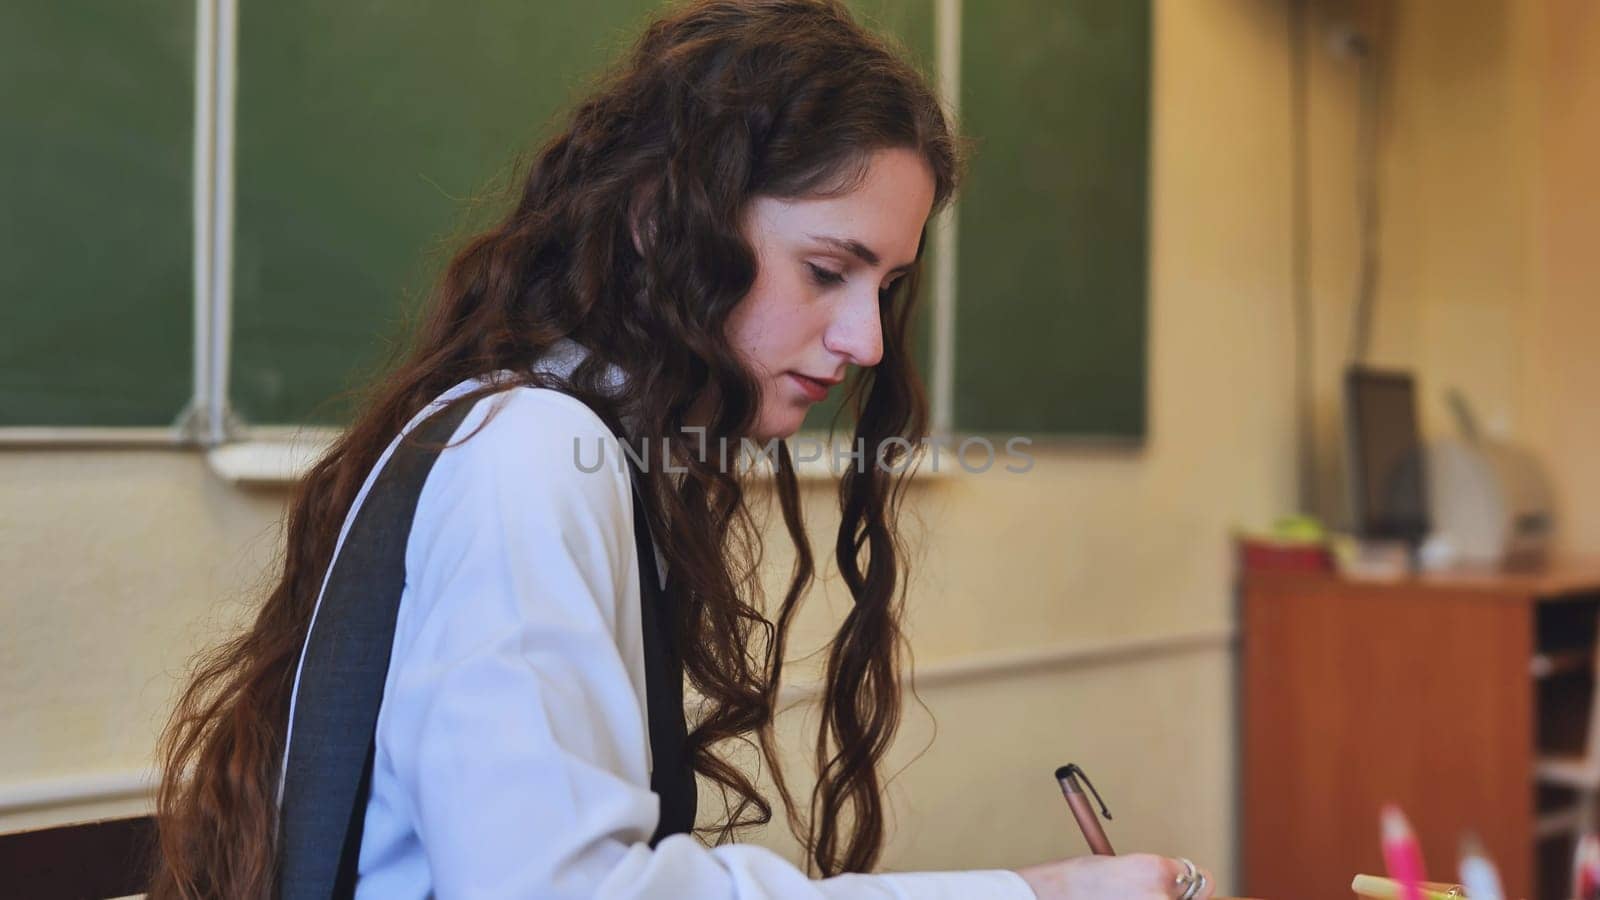 A young female student leads the class in the role of teacher